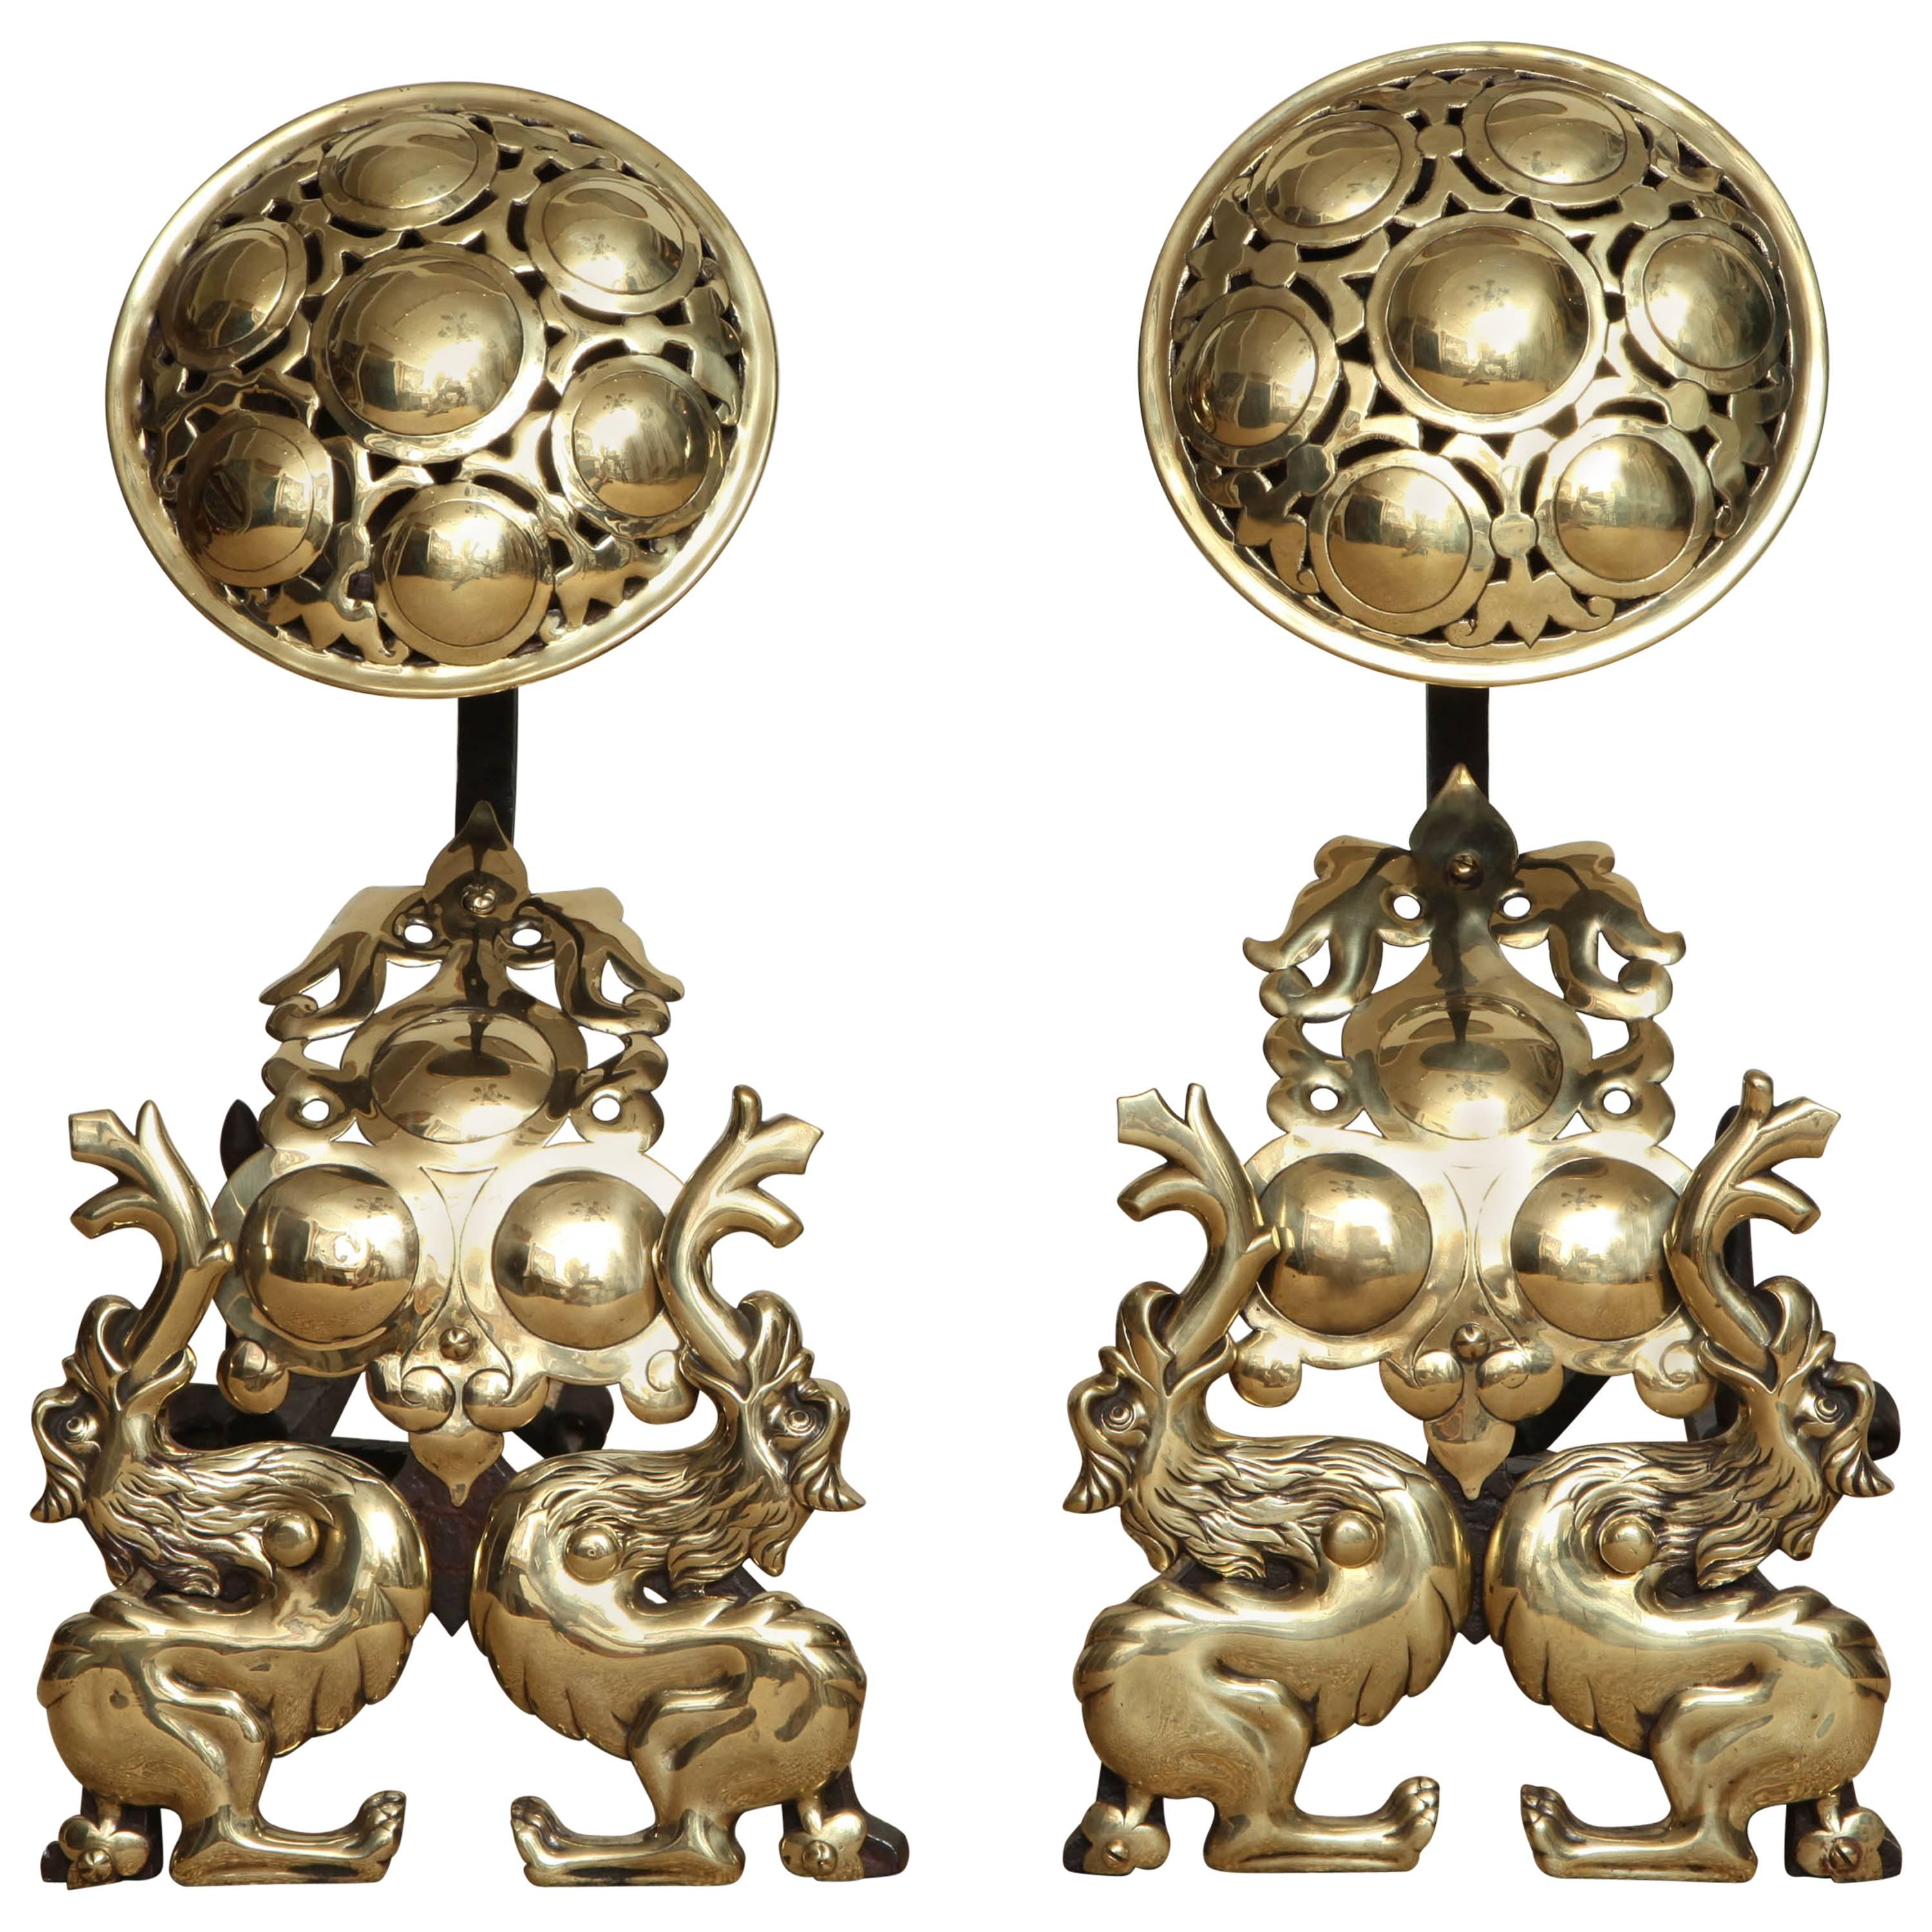 Striking Pair of Arts and Crafts Andirons